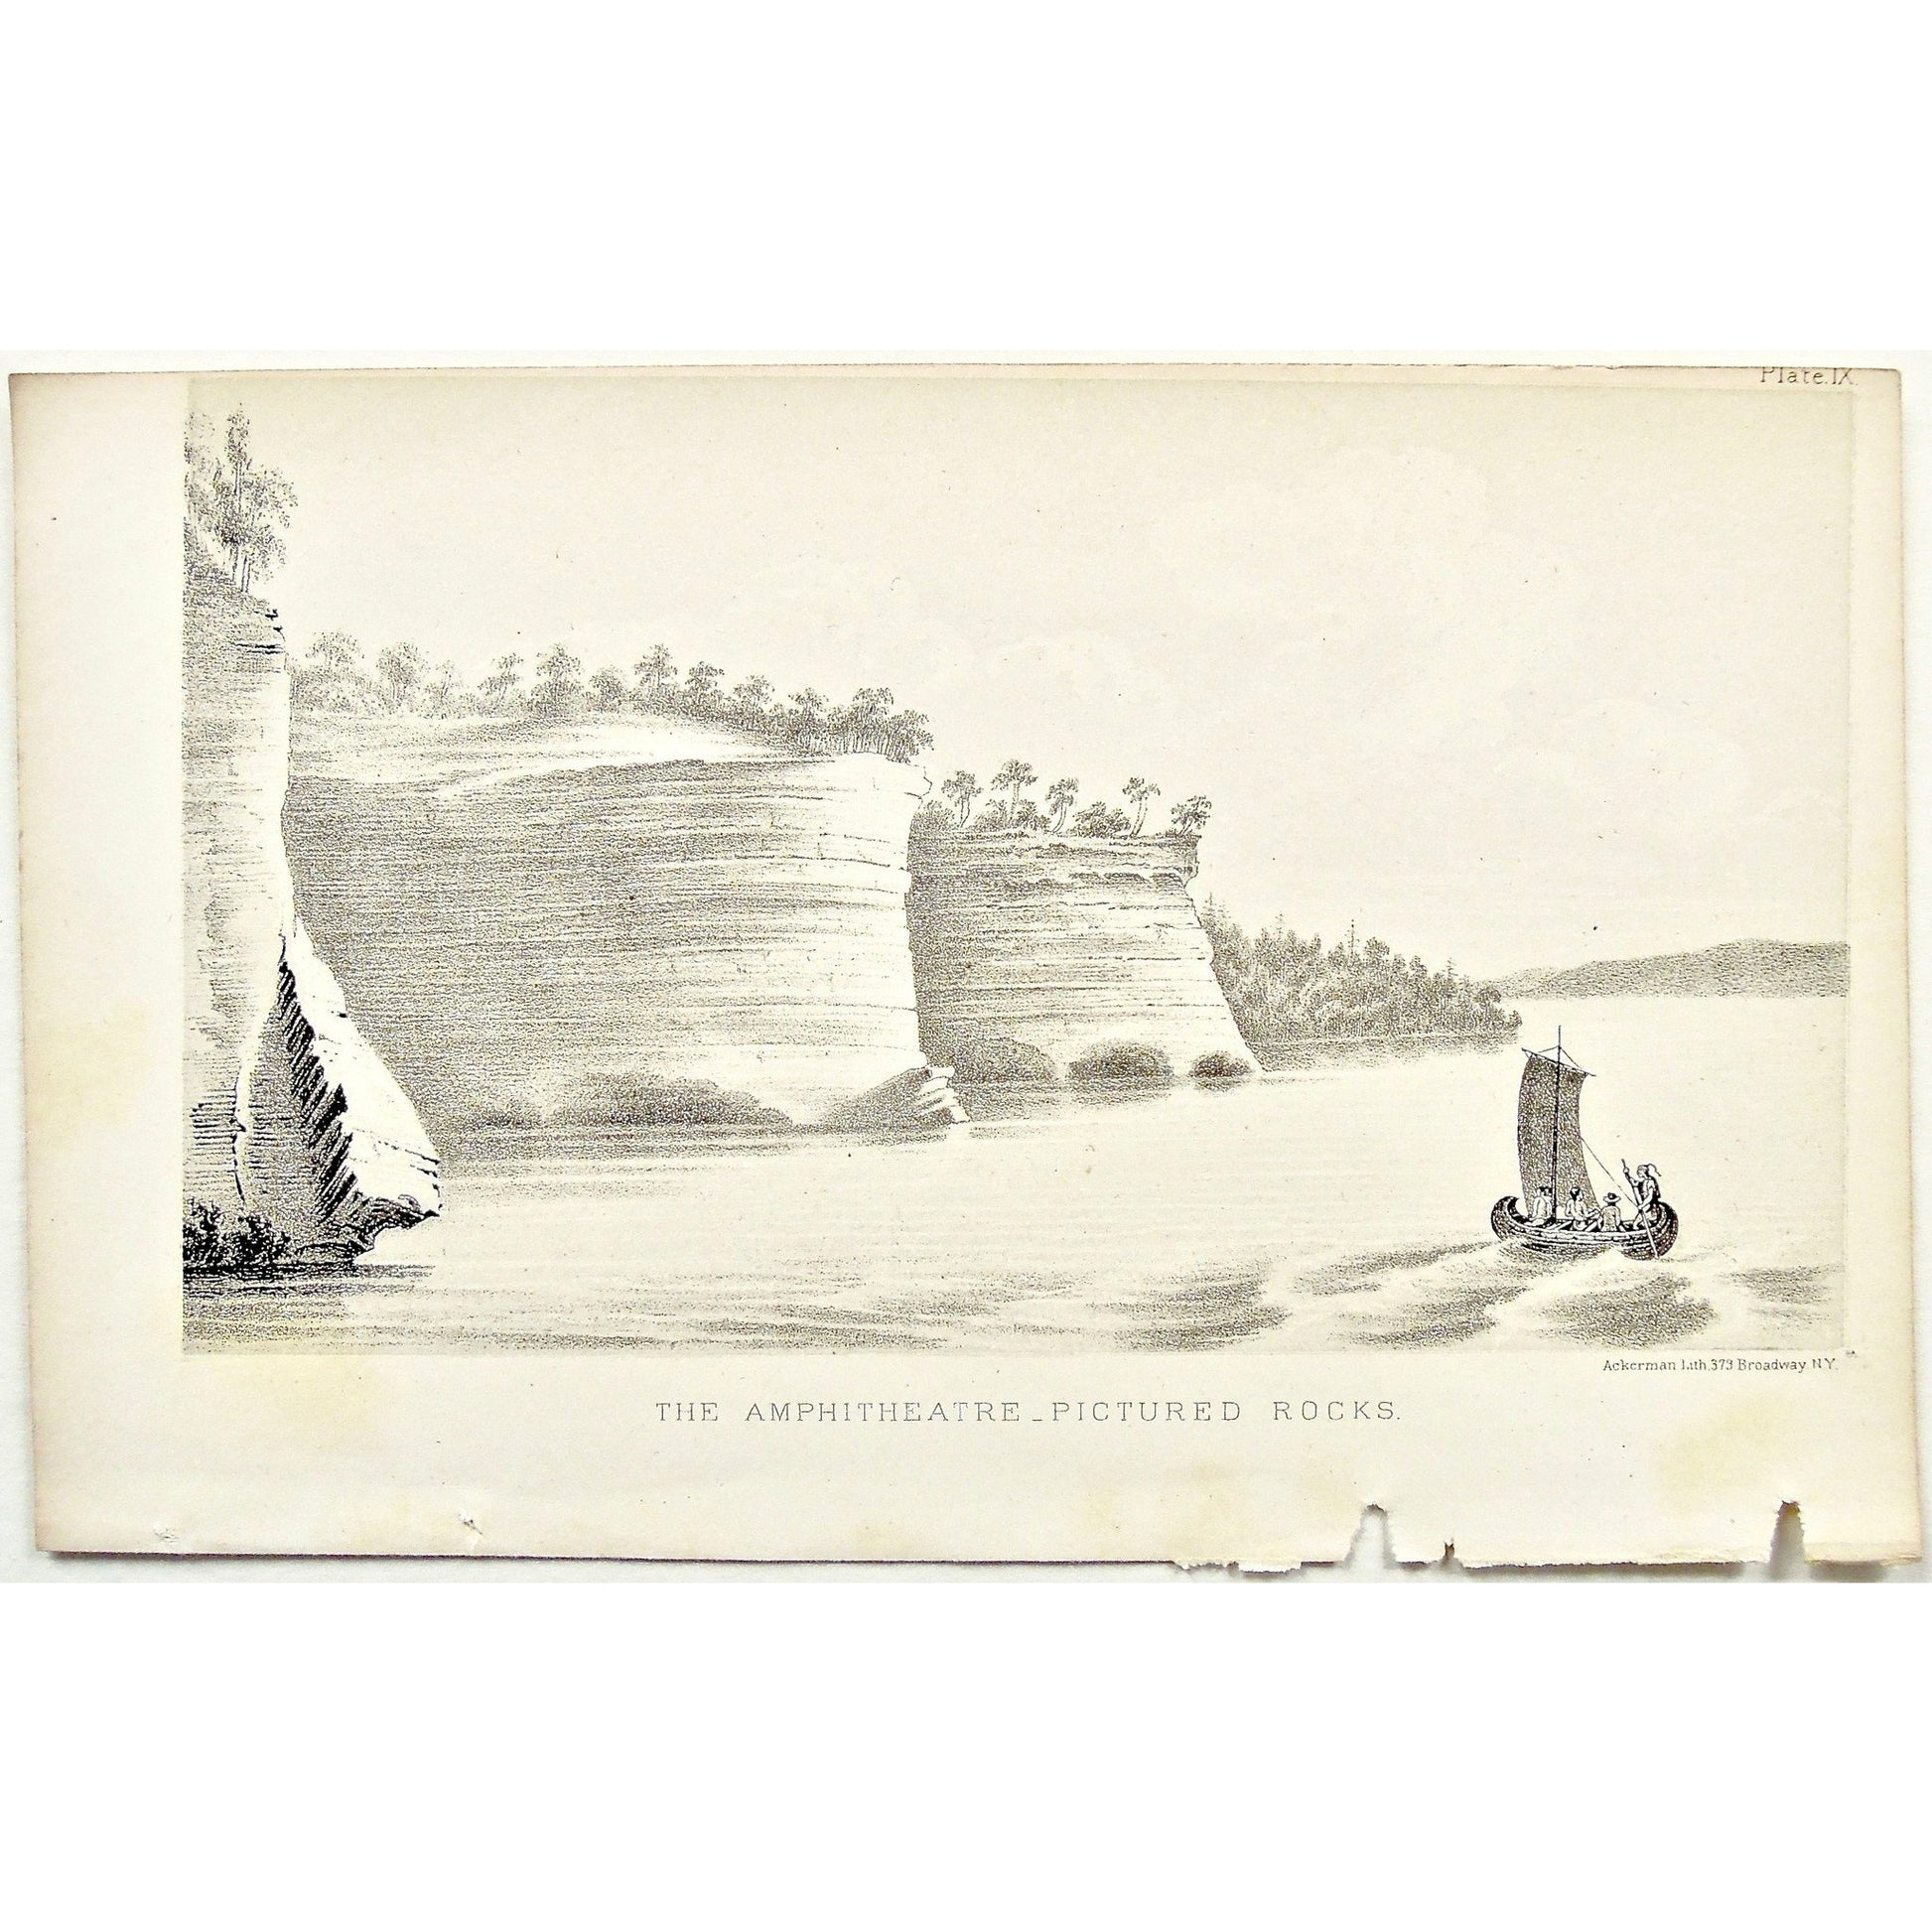 Amphitheater, Rocks, Rock formation, Pictured Rocks, Cliff, View, from the water, sail, Sailing, sailboat, Landscape, Lake Superior, Lake, Superior, National Lakeshore, Lakeshore, Michigan, MI, Ackerman, 379 Broadway, Foster, Whitney, House of Representatives, House of Reps., Report, Geology, Topography, Land District, State of Michigan, Part II, The Iron Region, General Geology, Washington D.C., Washington, DC, D.C., 1851, lithograph, two-toned, Antique Print, Antique, Prints, Vintage, Art, Wall art, Decor